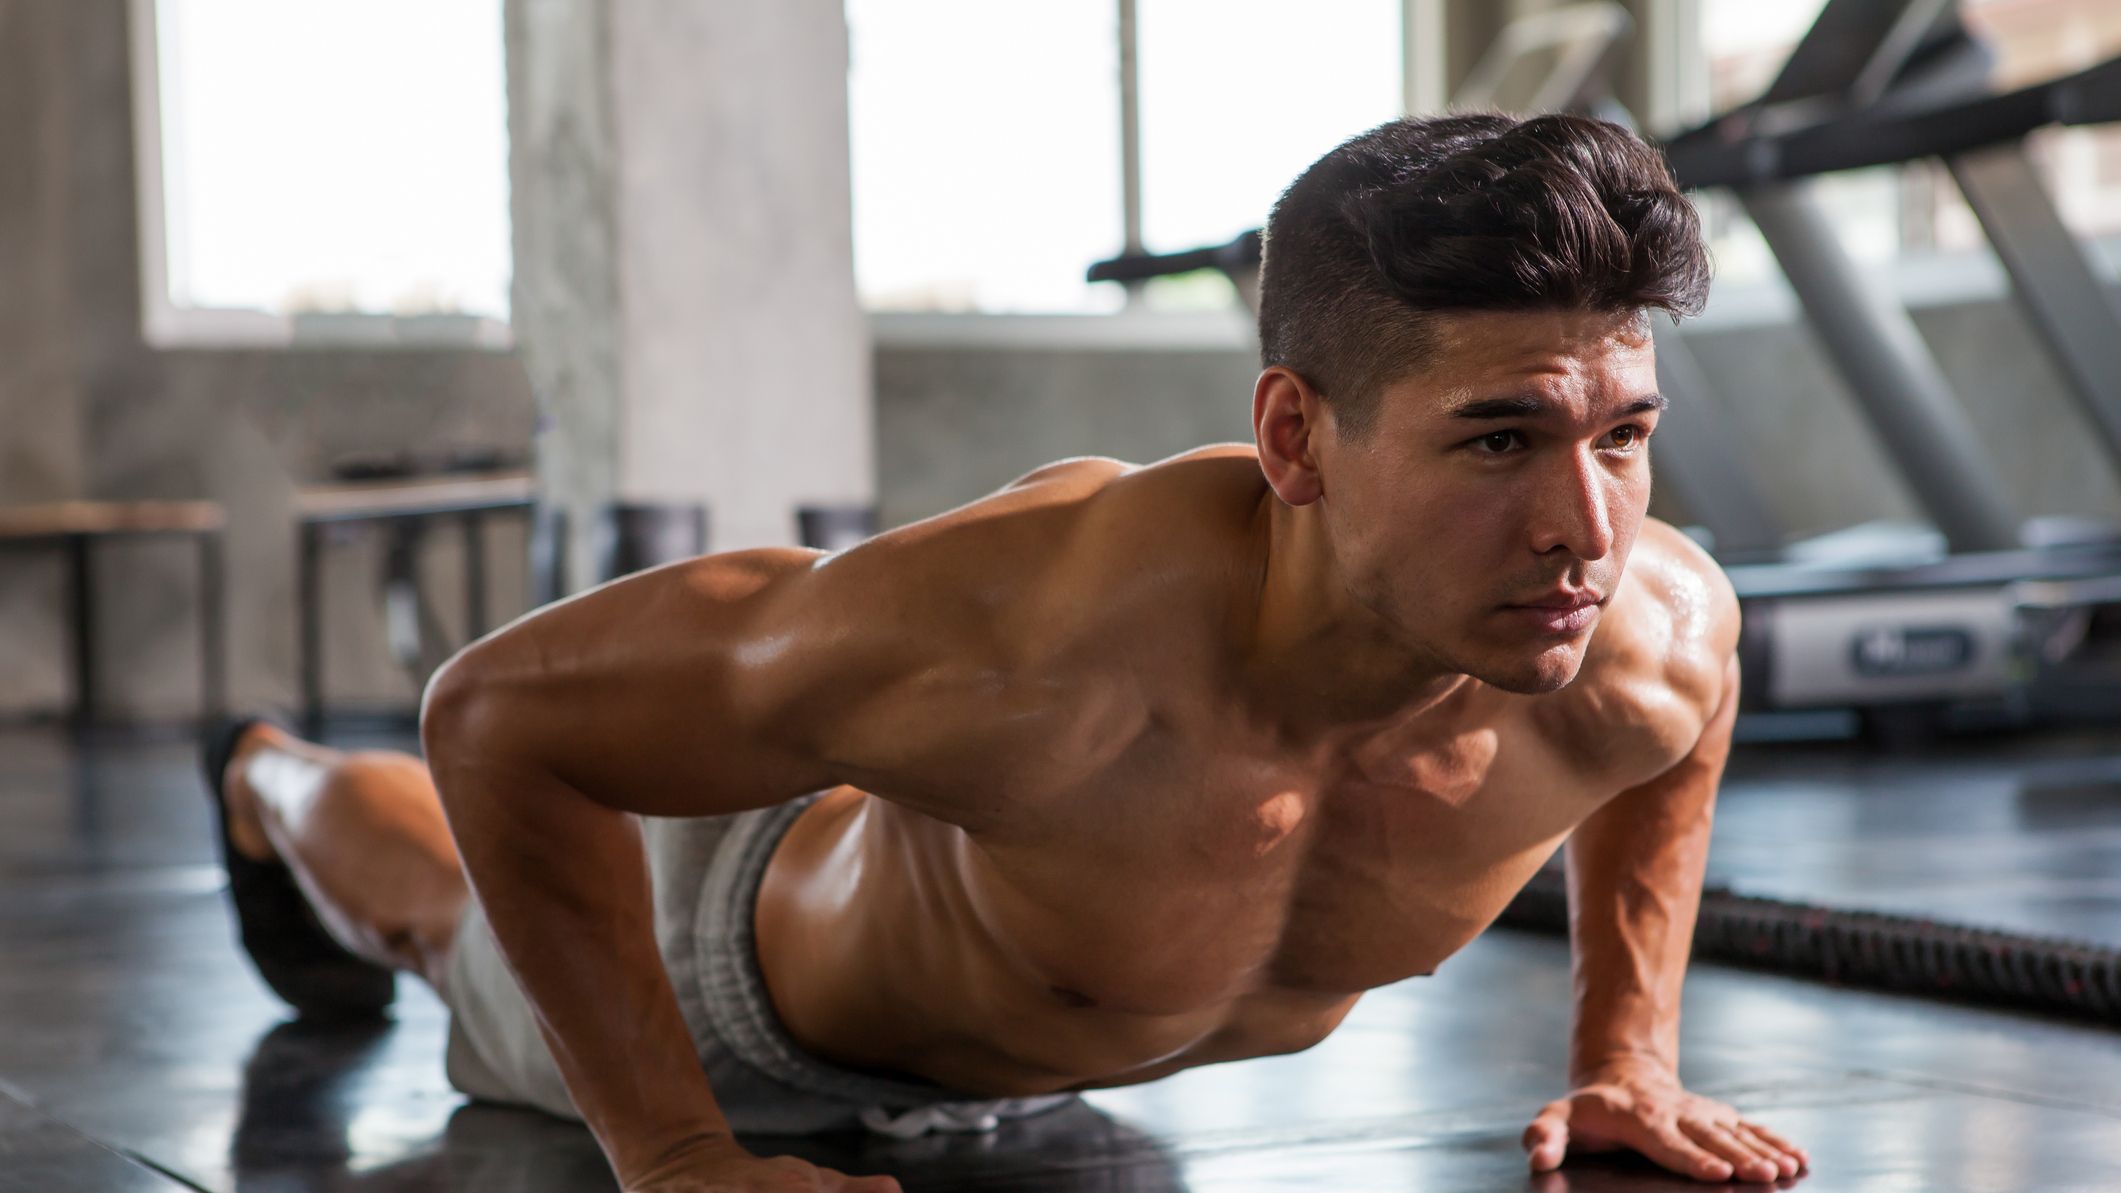 https://hips.hearstapps.com/hmg-prod/images/full-length-of-male-athlete-doing-push-ups-in-gym-royalty-free-image-1606406029.?crop=1xw:0.84375xh;center,top